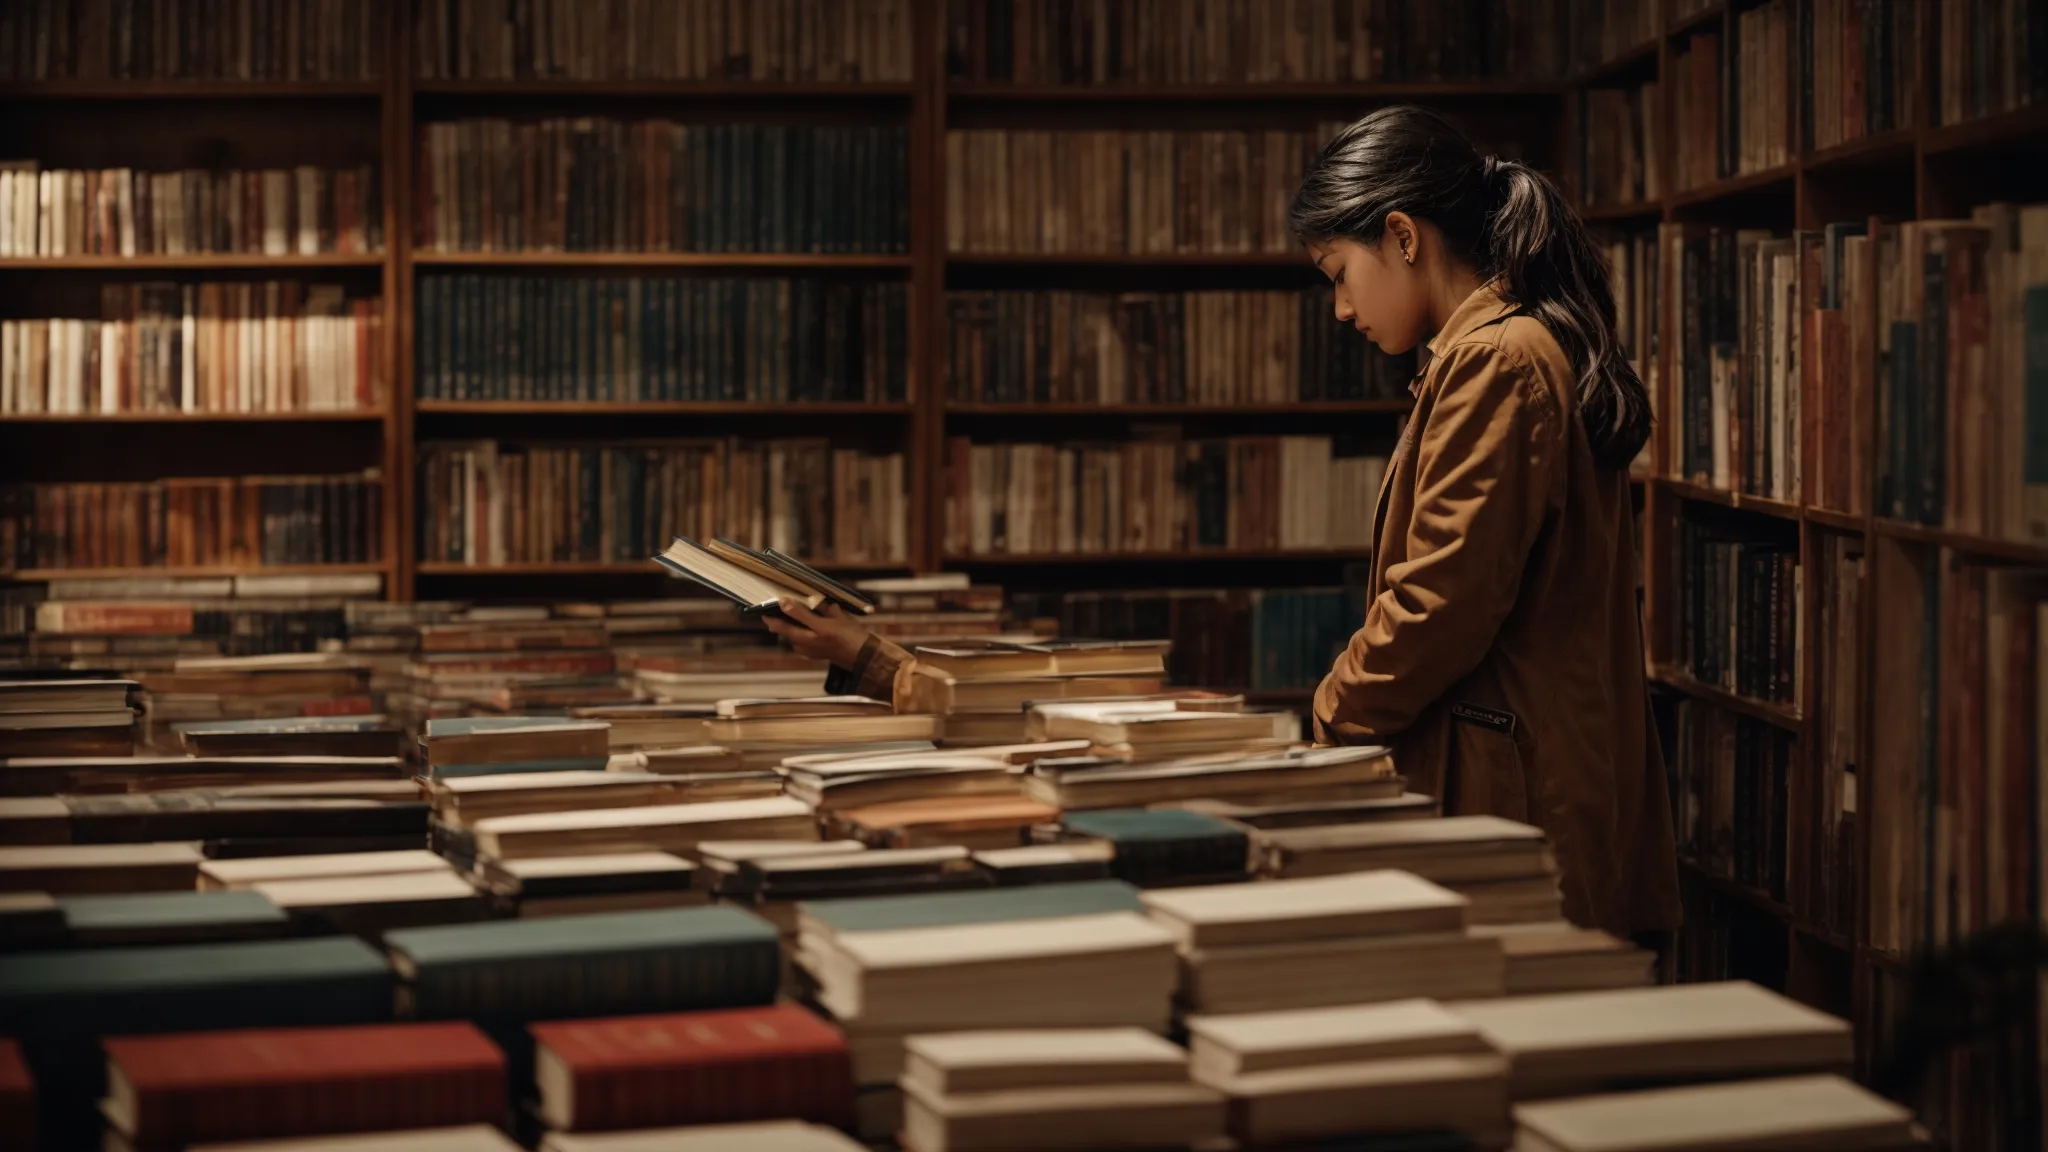 a librarian meticulously arranging books on a shelf according to genre and relevance.